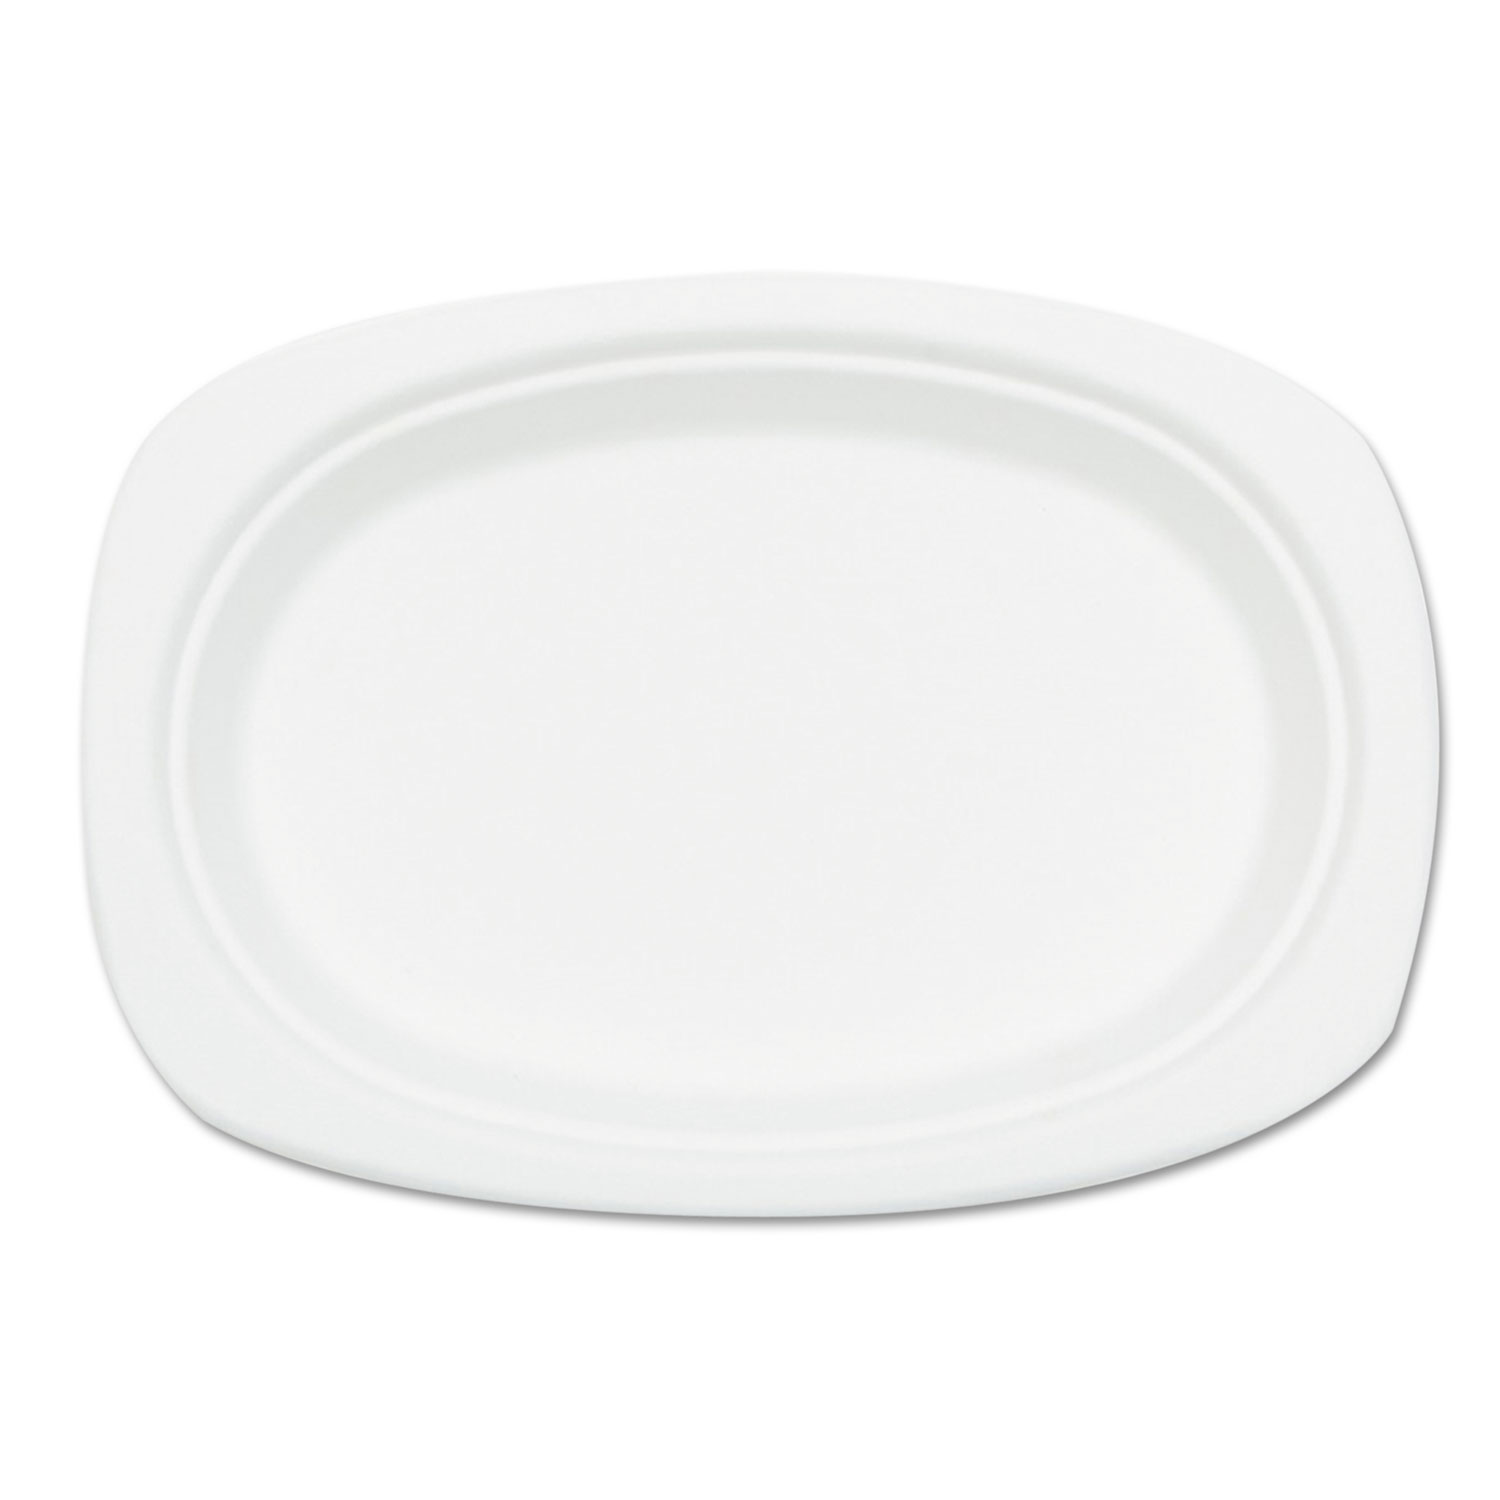  NatureHouse NAH-P009 Compostable Sugarcane Bagasse Oval Plate, 9 x 6.5, White, 50/Pack (SVAP009) 